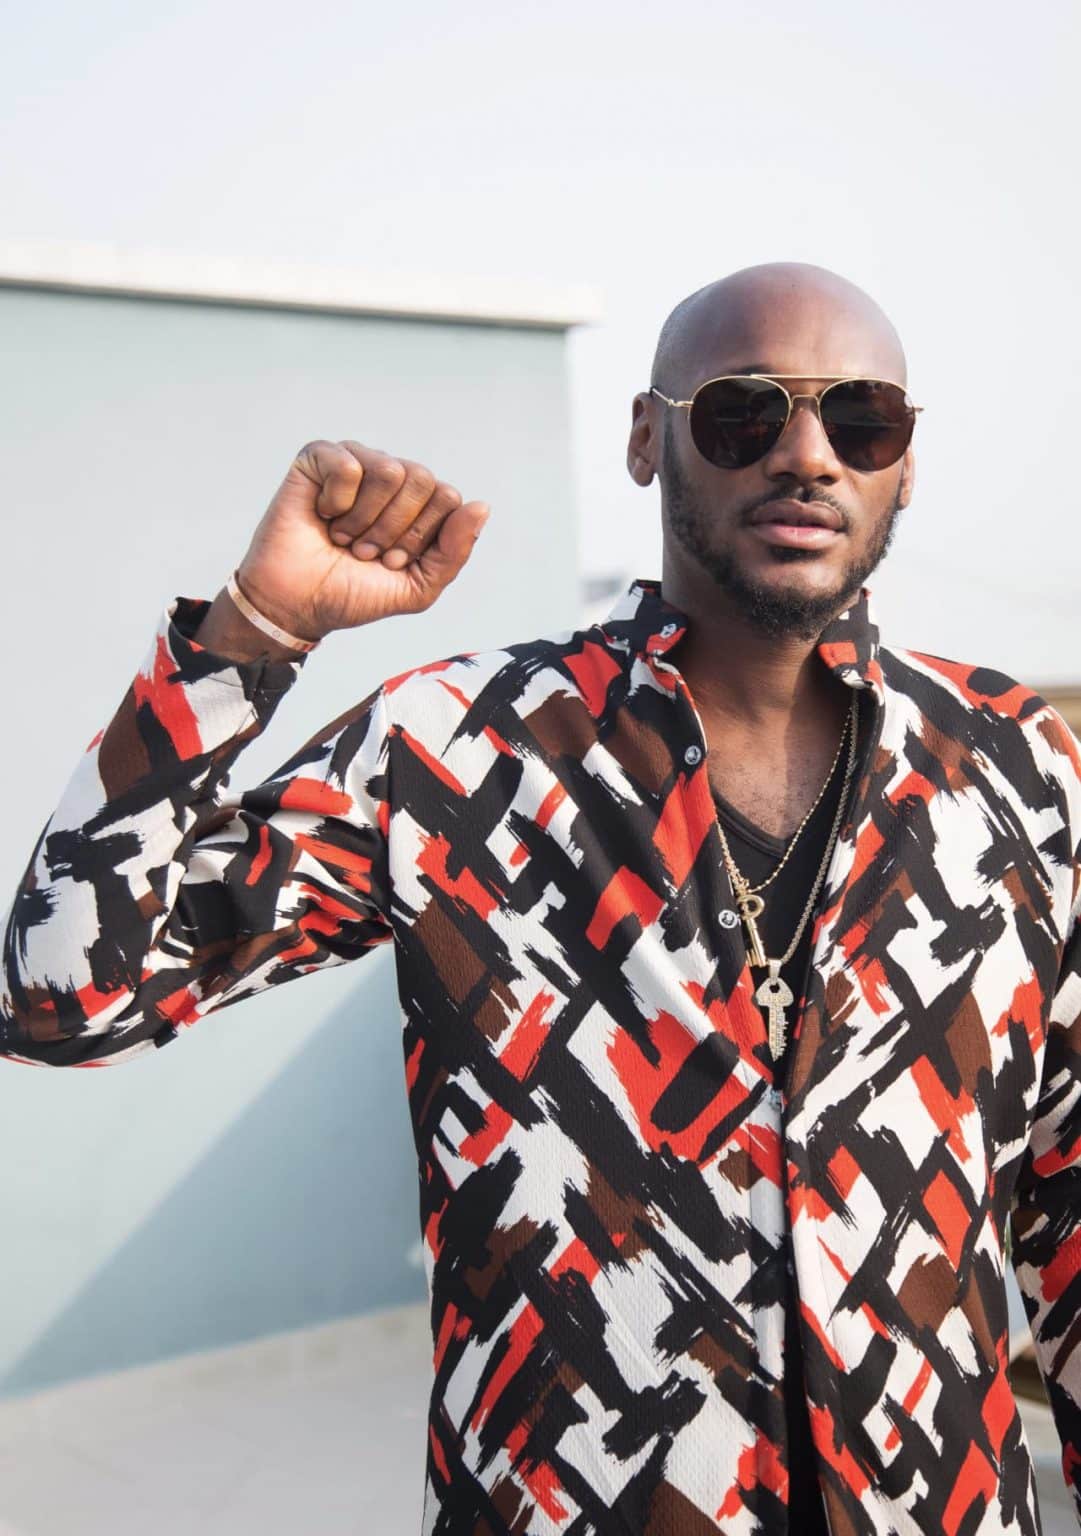 To Blame Buhari For All The Problems In Nigeria, "It Is Crazy" Says 2baba